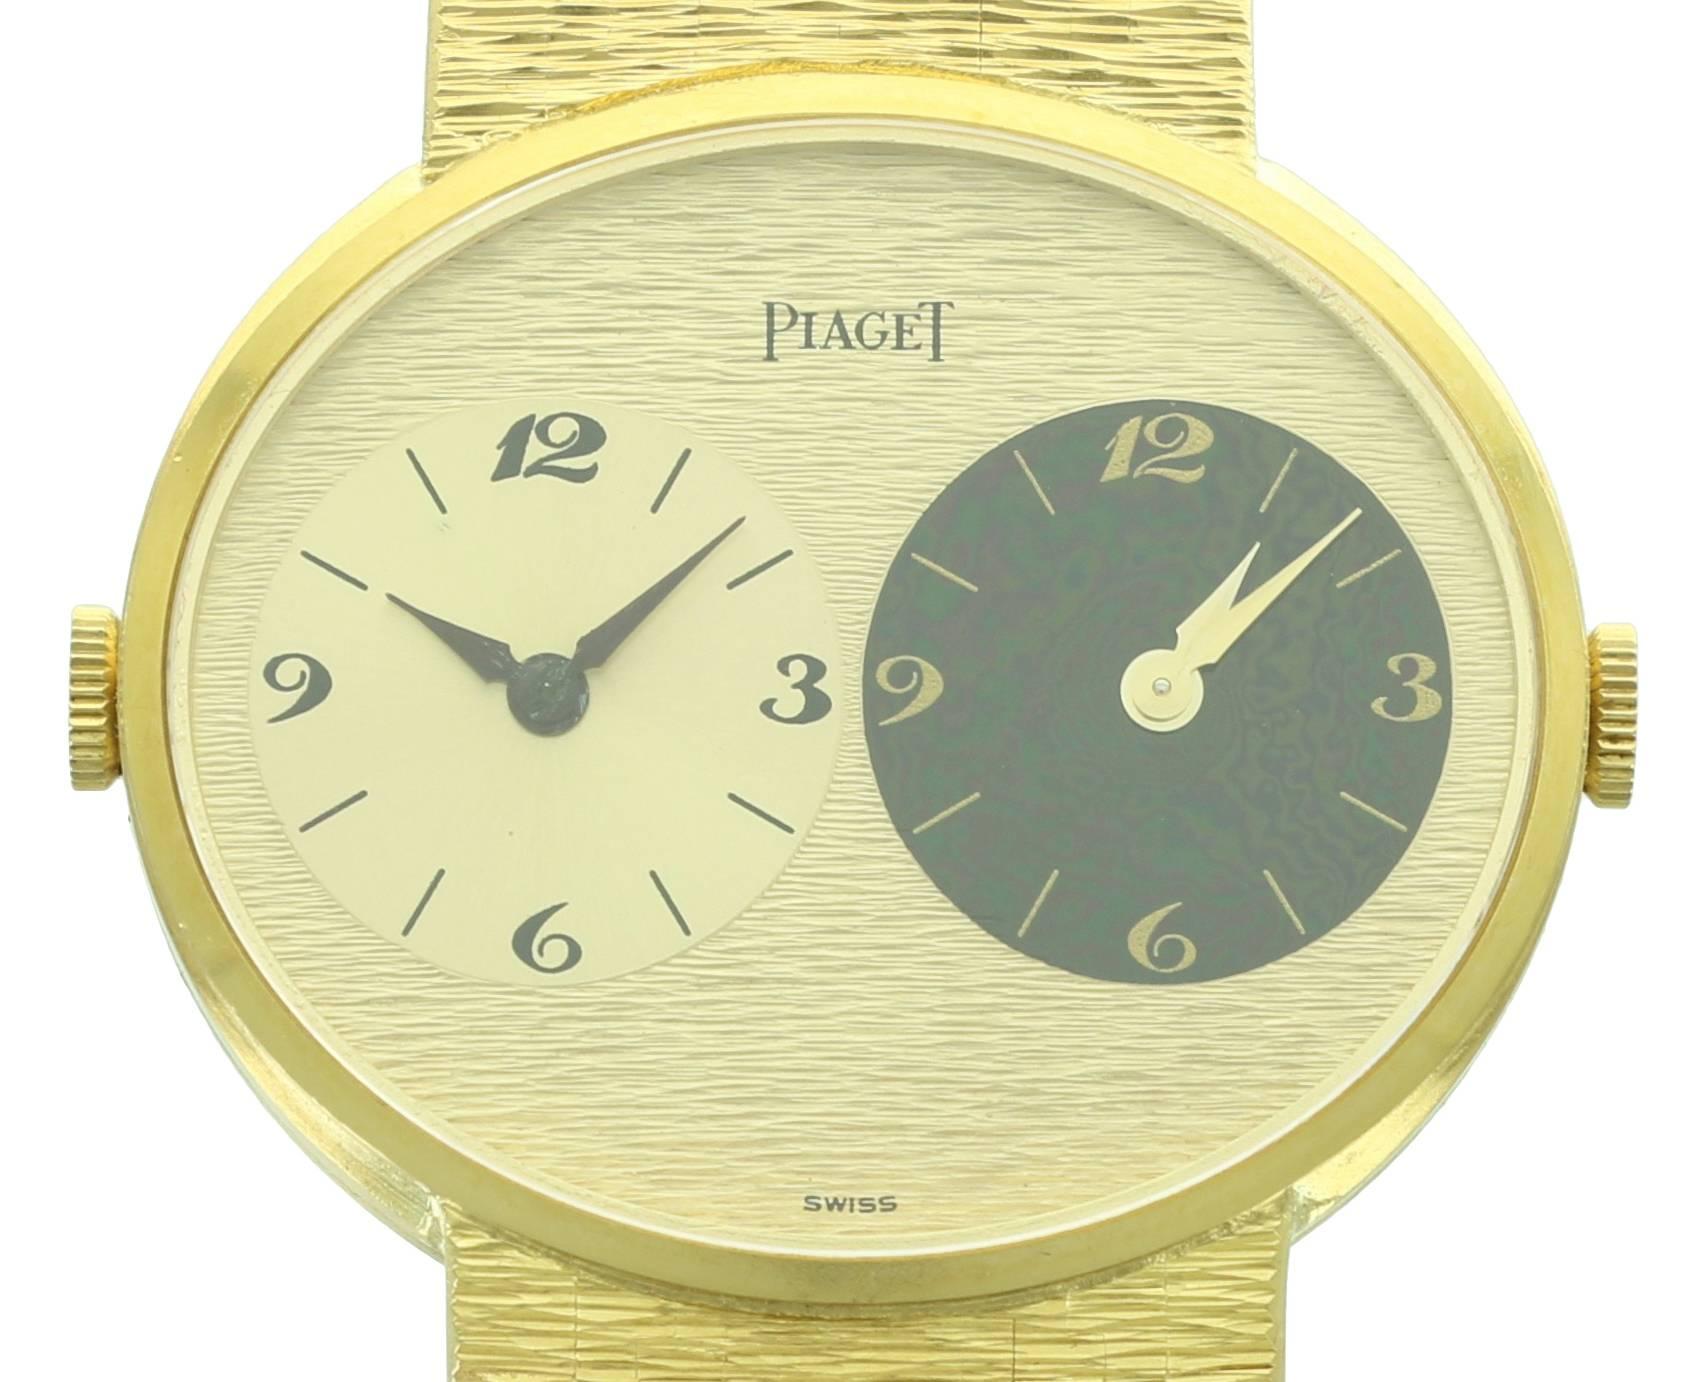 This thin, 1970s Piaget watch keeps time in two timezones while looking elegant and classic. It comes on its original Piaget bracelet, fitting a wrist 7 inches in circumference. 